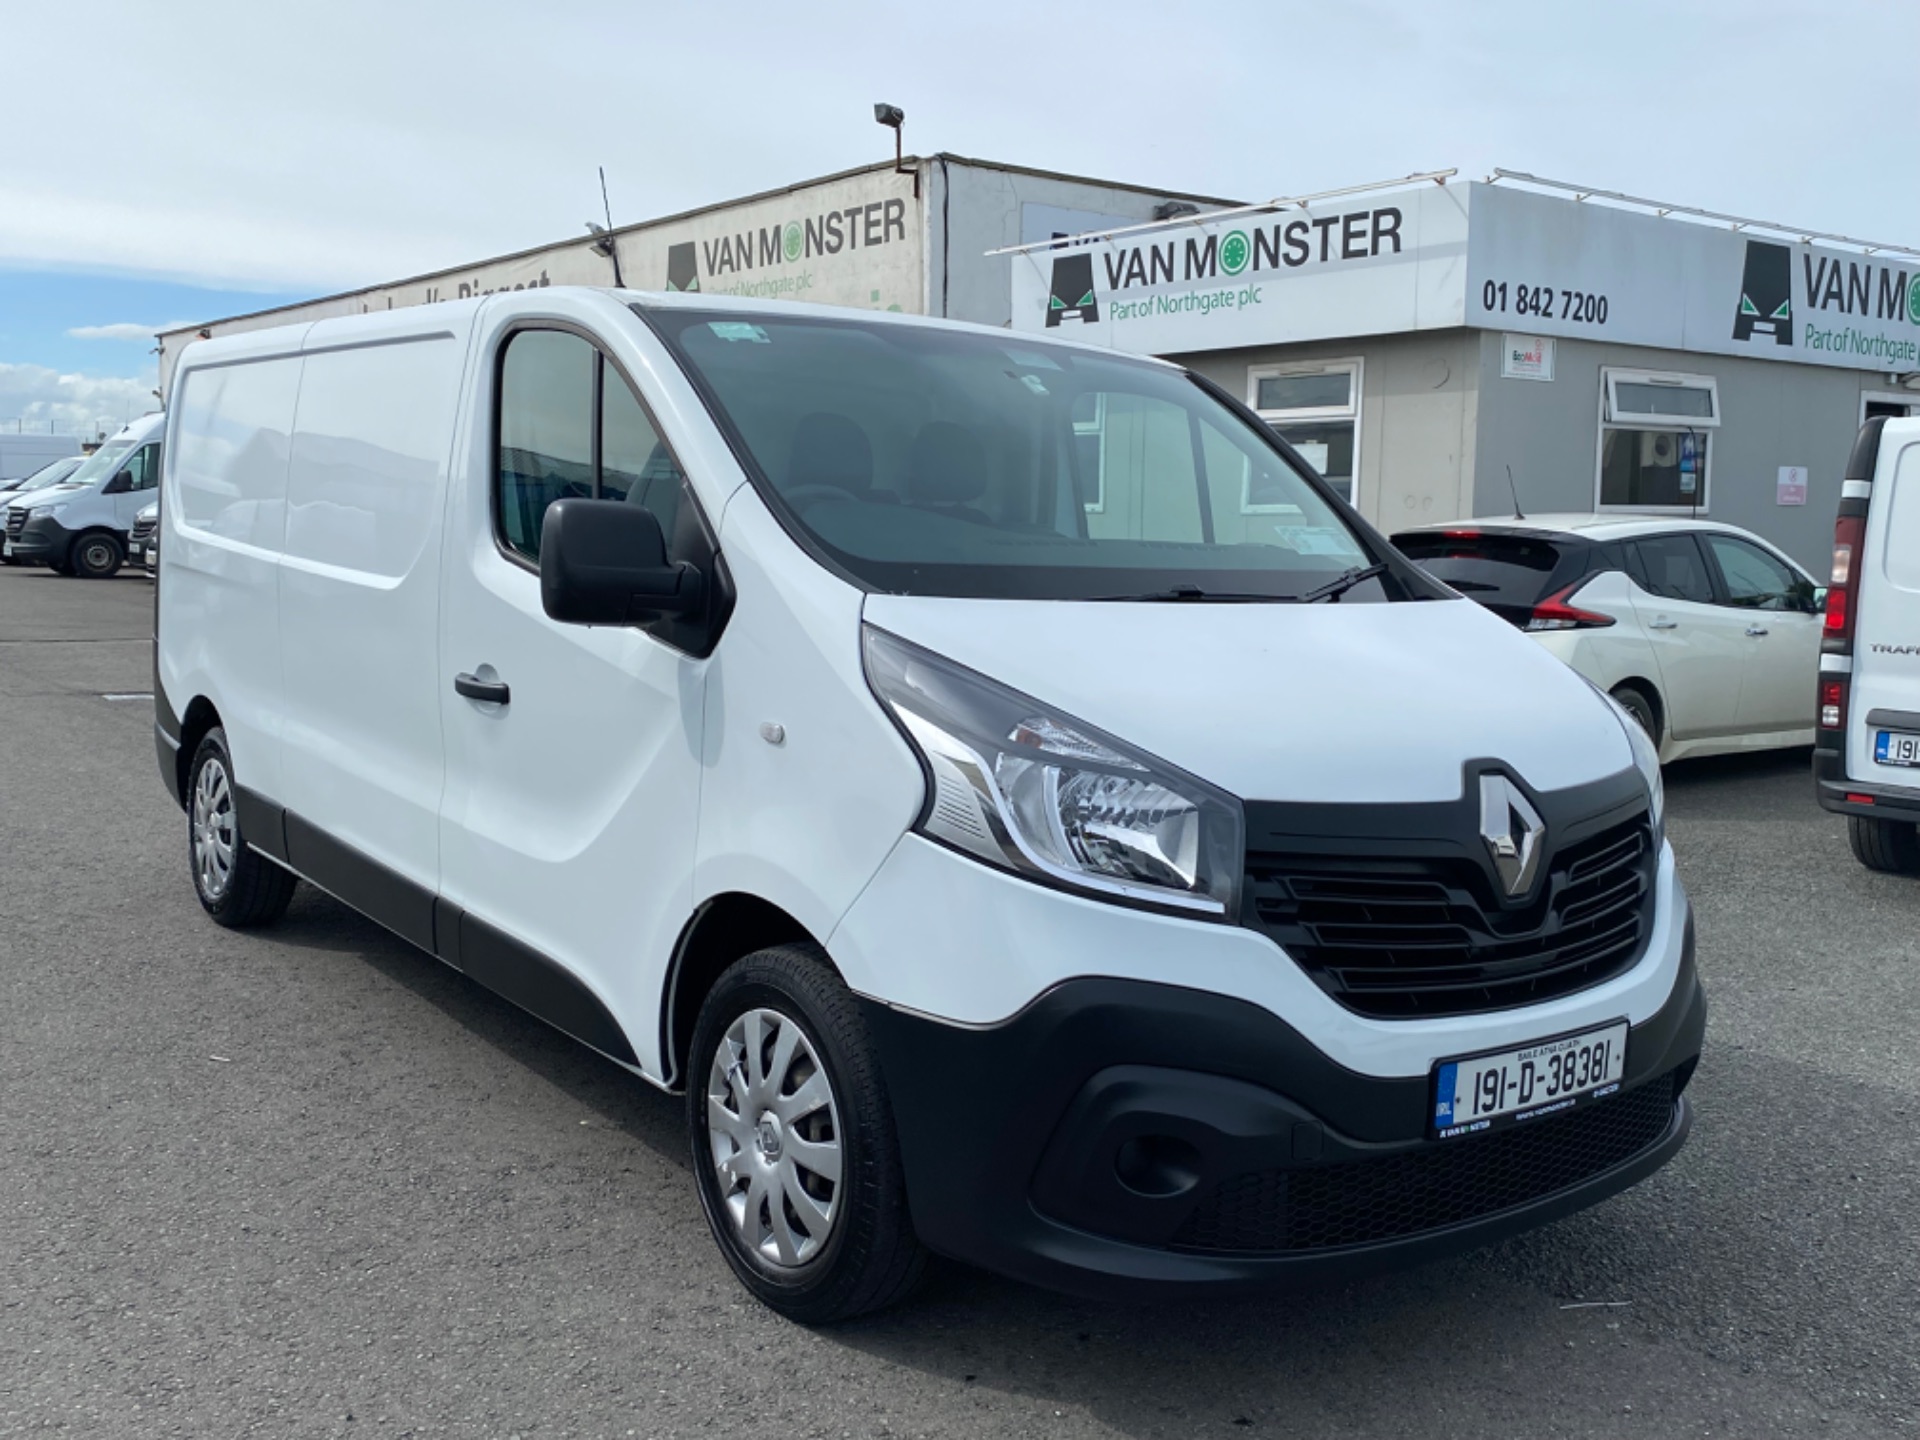 2019 Renault Trafic LL29 DCI 120 Business (191D38381)